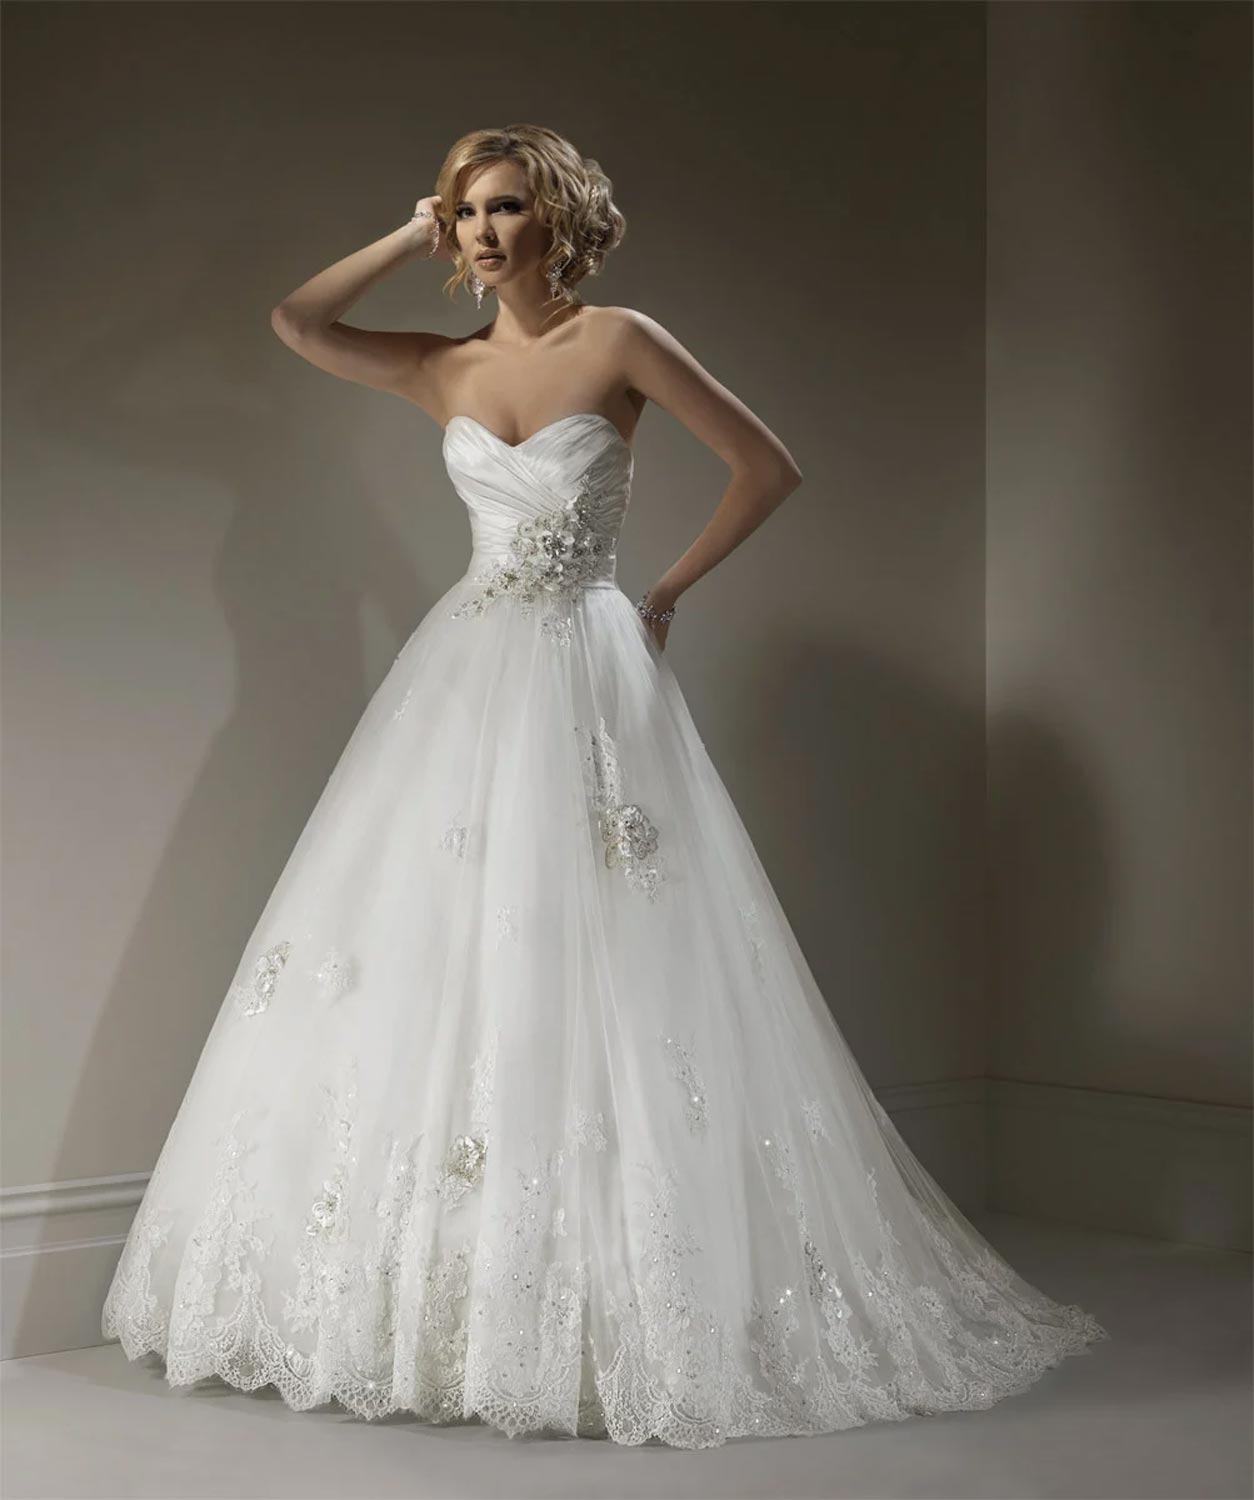 Isadora Marie - Maggie Sottero - Eve's Bridal Wear